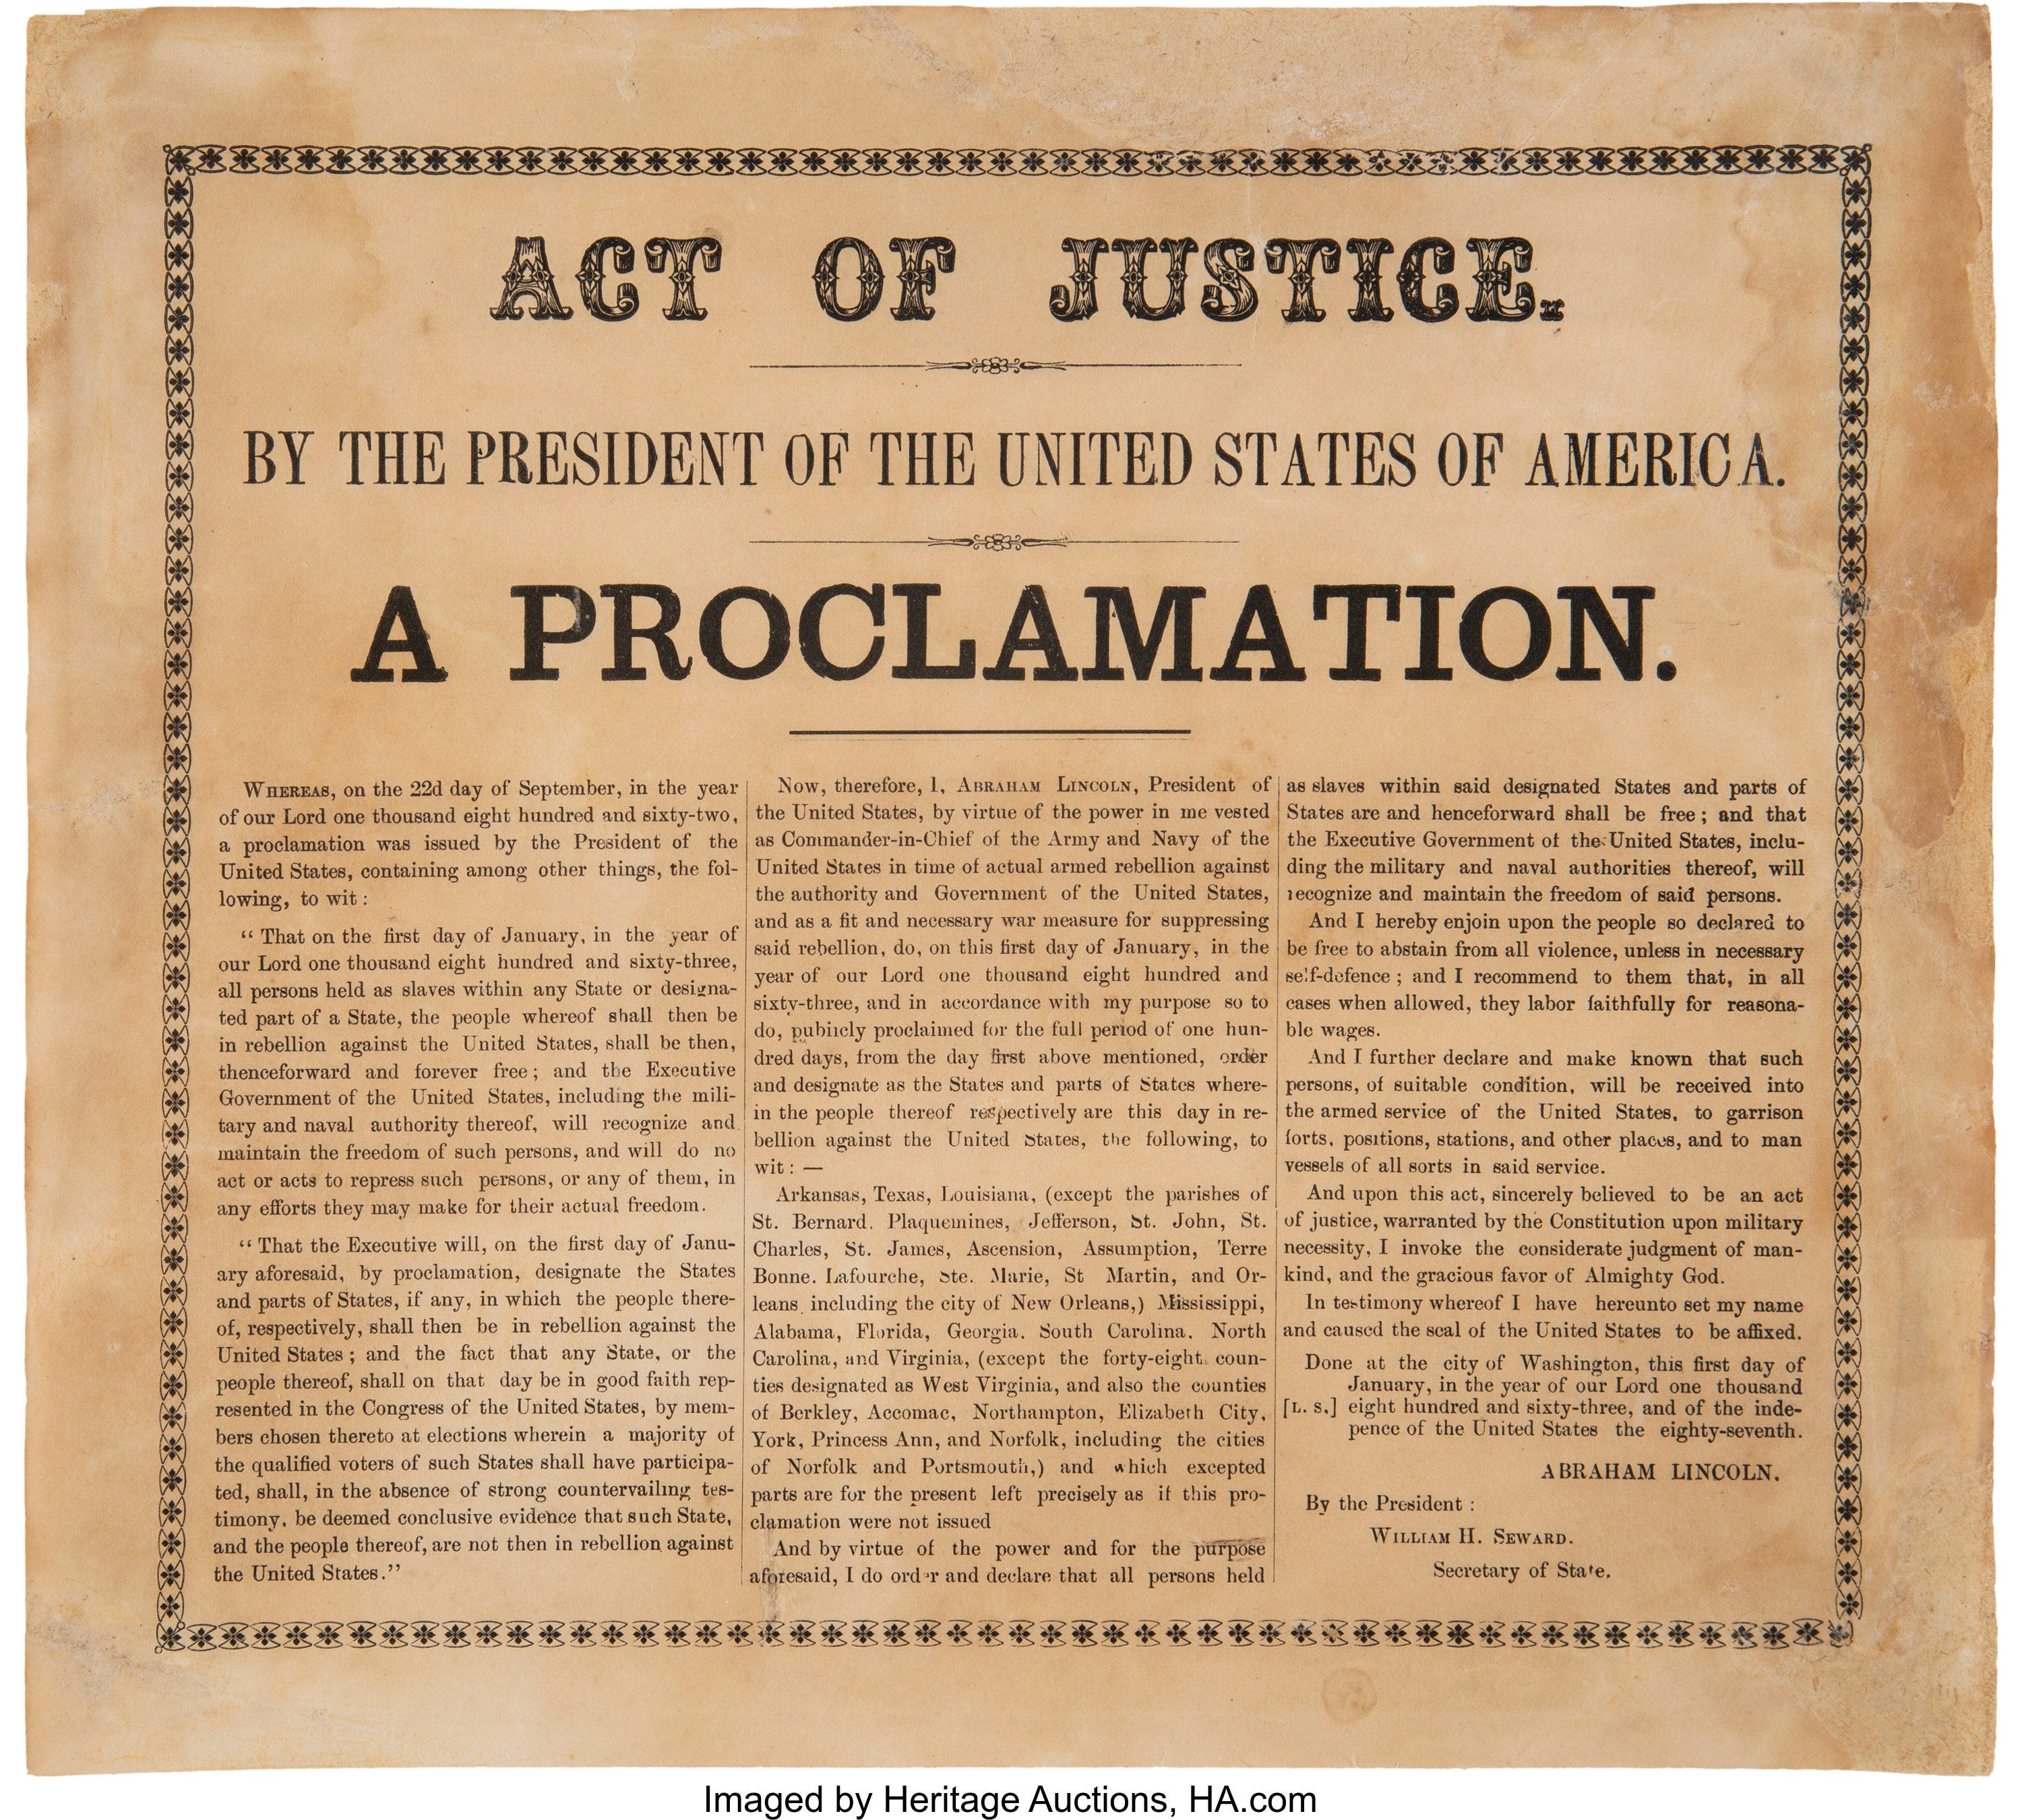 The Emancipation Proclamation by Jemar Tisby, PhD